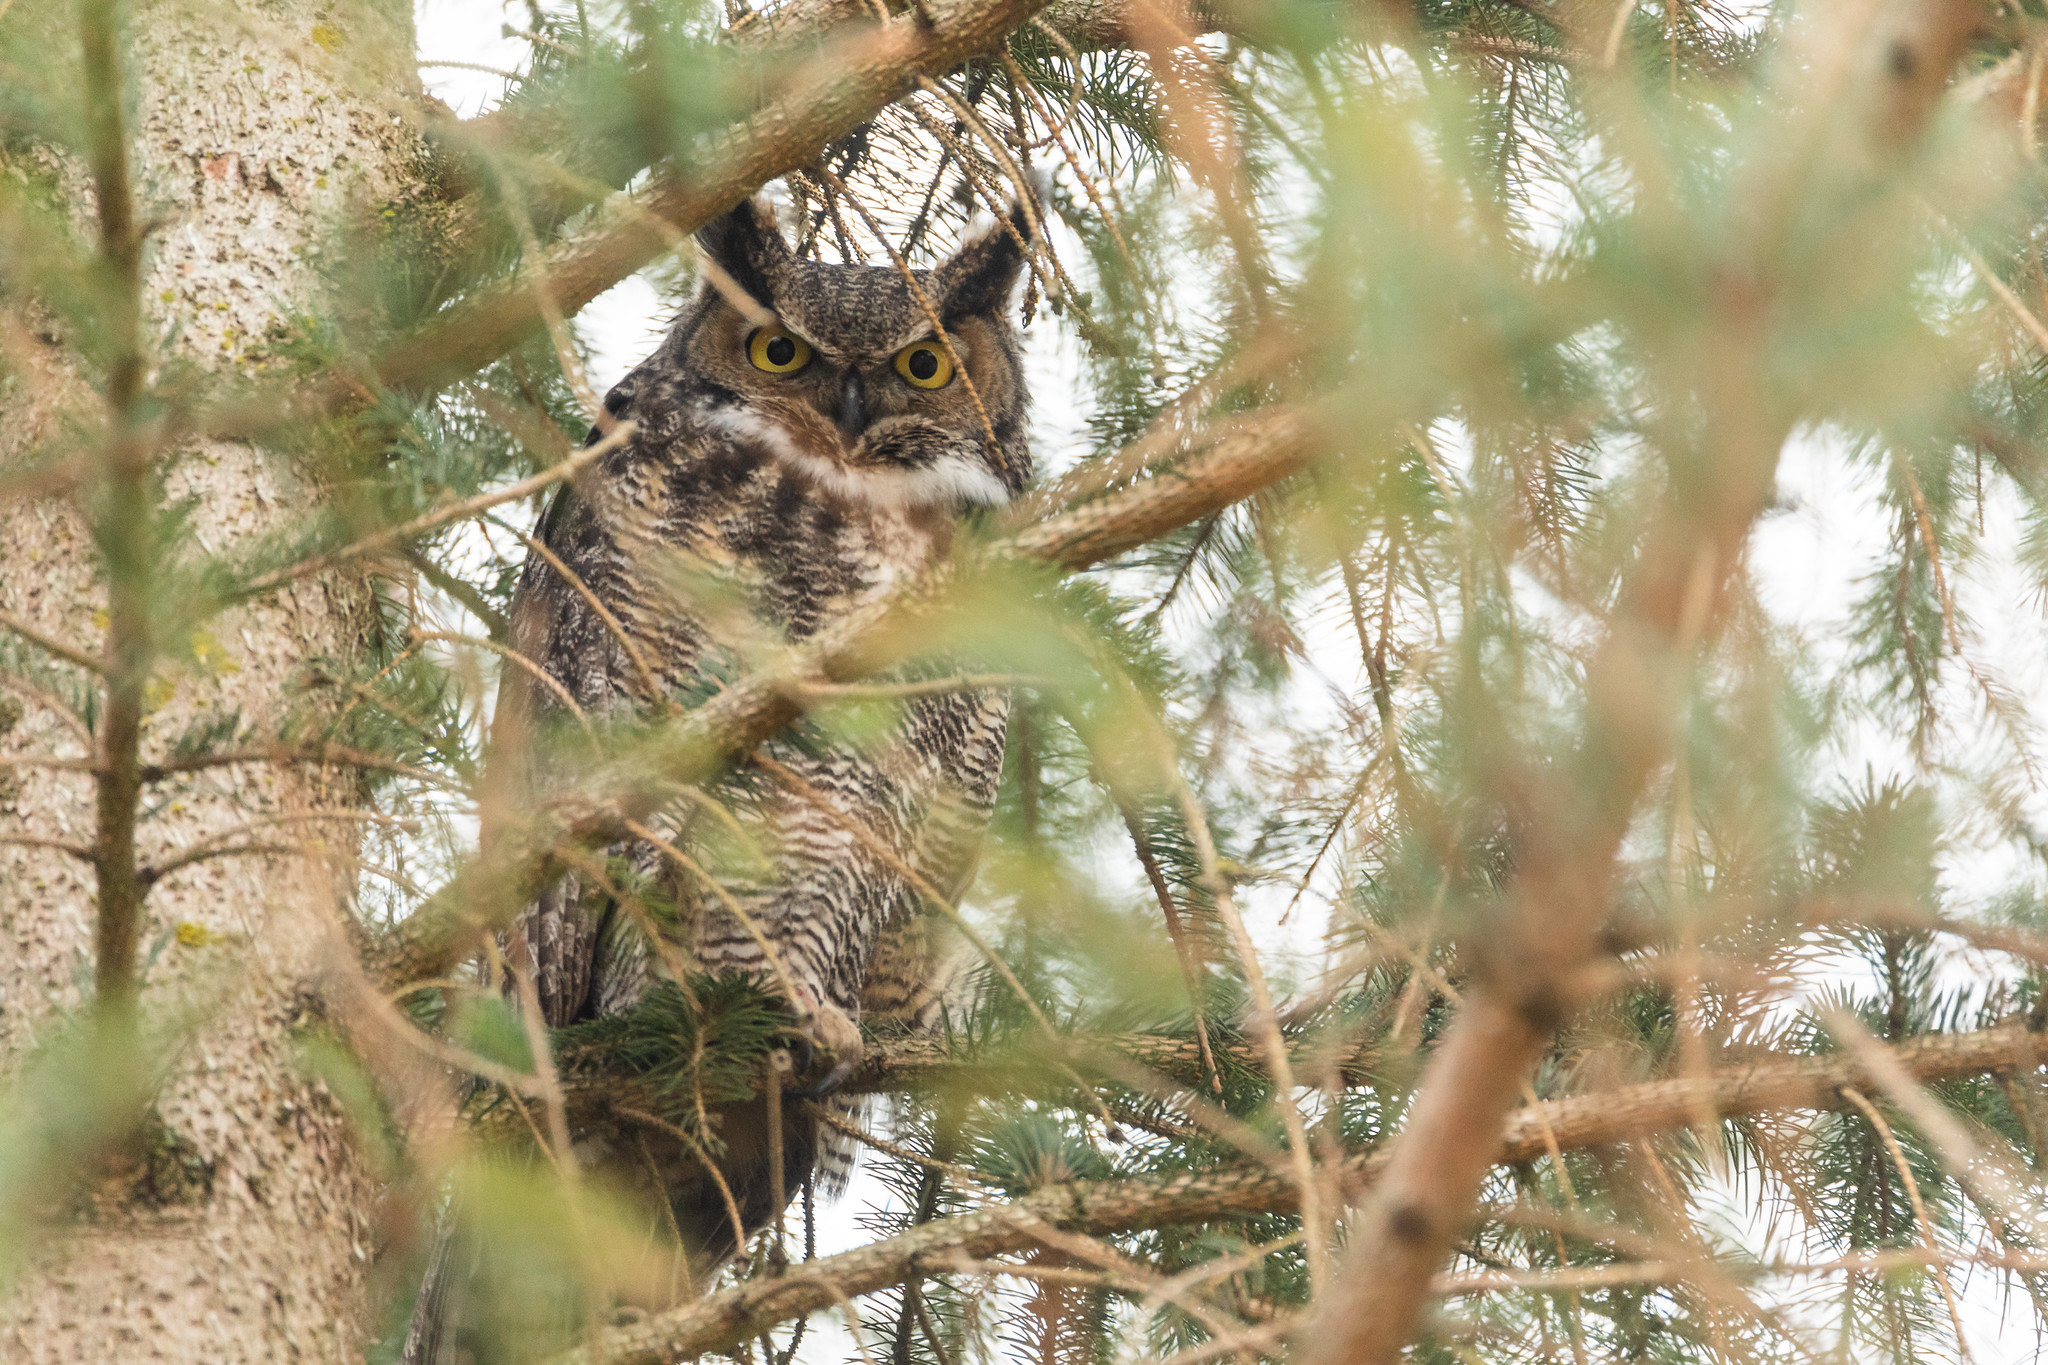 An owl (either a Great Horned or Long Eared Owl) is sitting in a tree, partially obscured by branches. The owl is making eye contact with the camera.